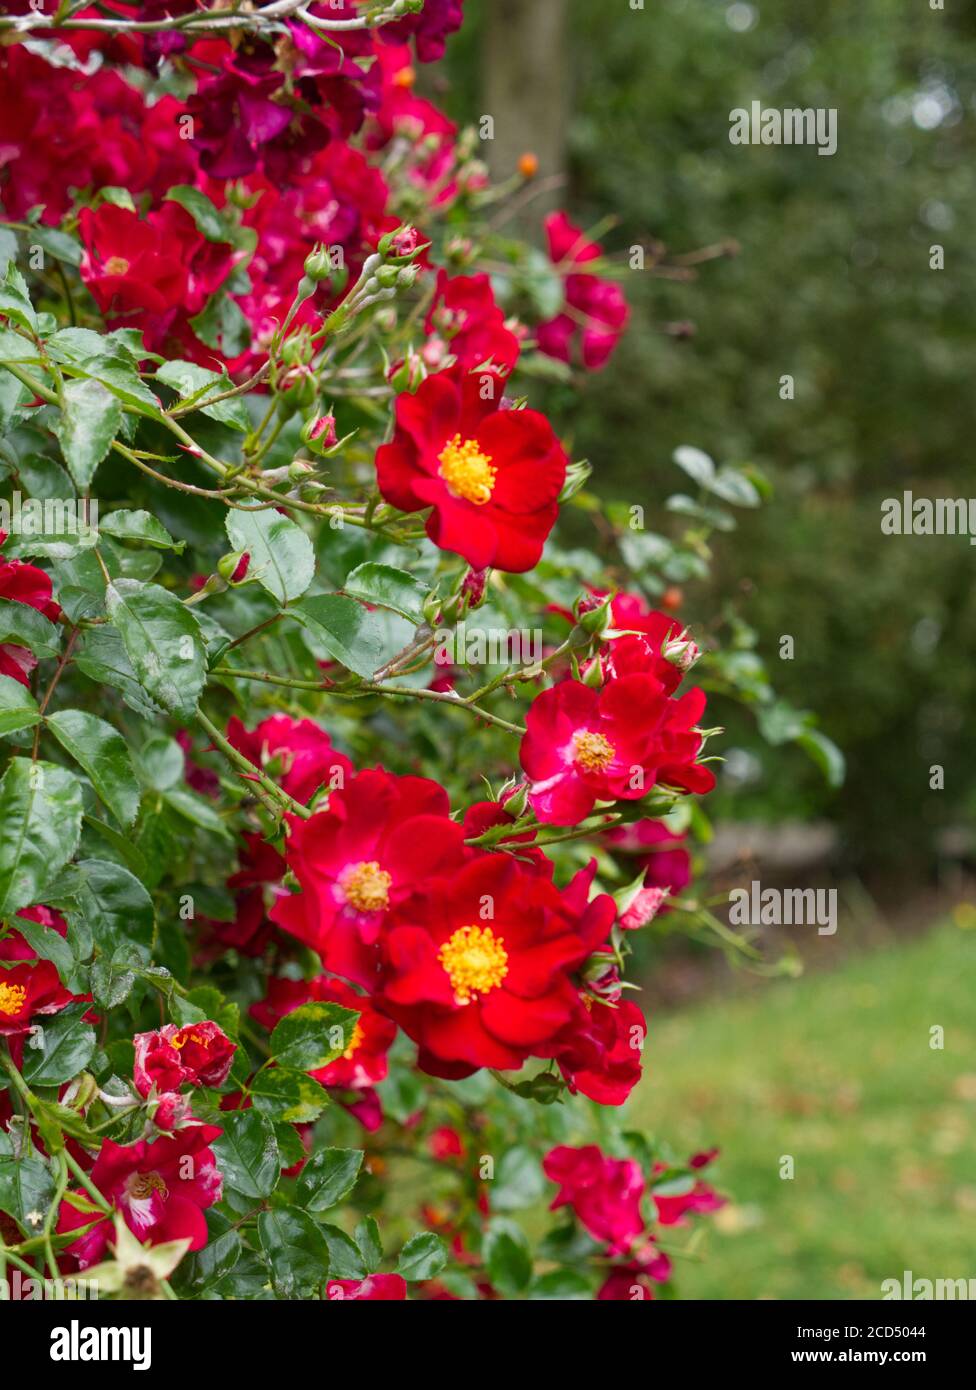 Red Alpine Rose. Rosa Pendulina. Drooping Rose. Vibrant Red. Rose Gardens. Hoop Lane Crematorium & Public Remembrance Gardens of Tranquility. London. Stock Photo